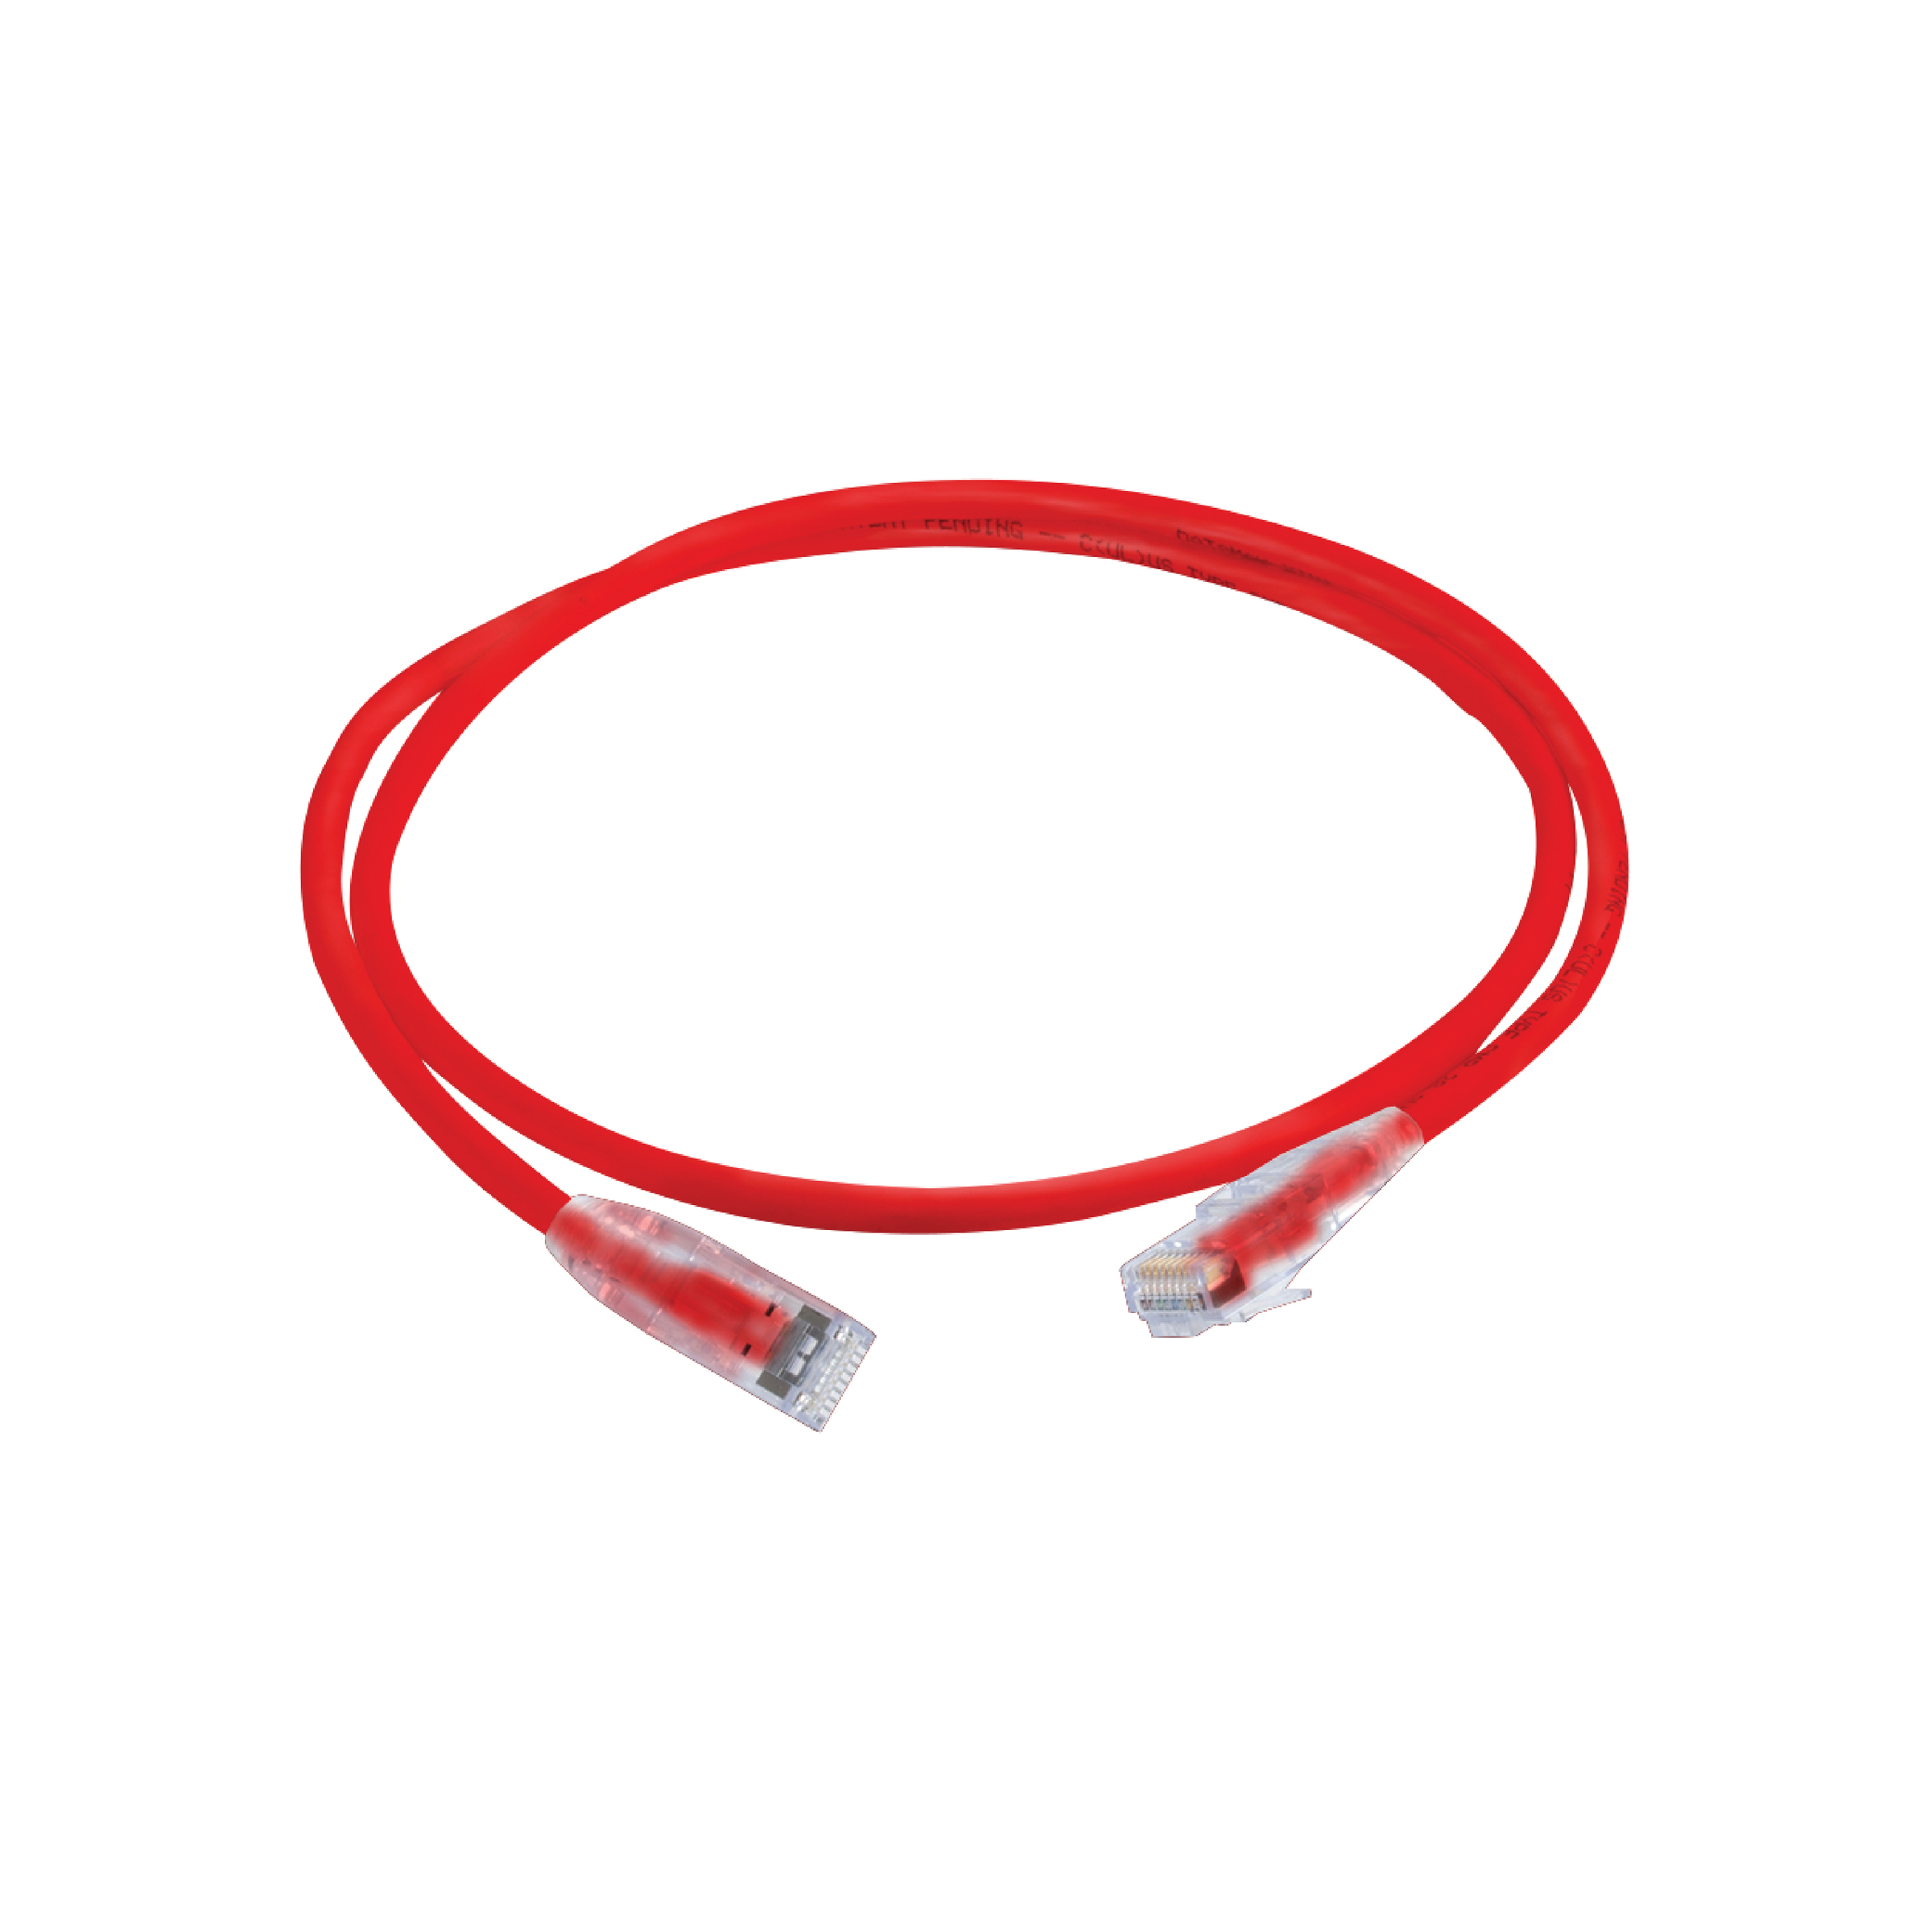 Structured Cabling Solution_Cable Boots_Patchcord Cable_Red.jpg